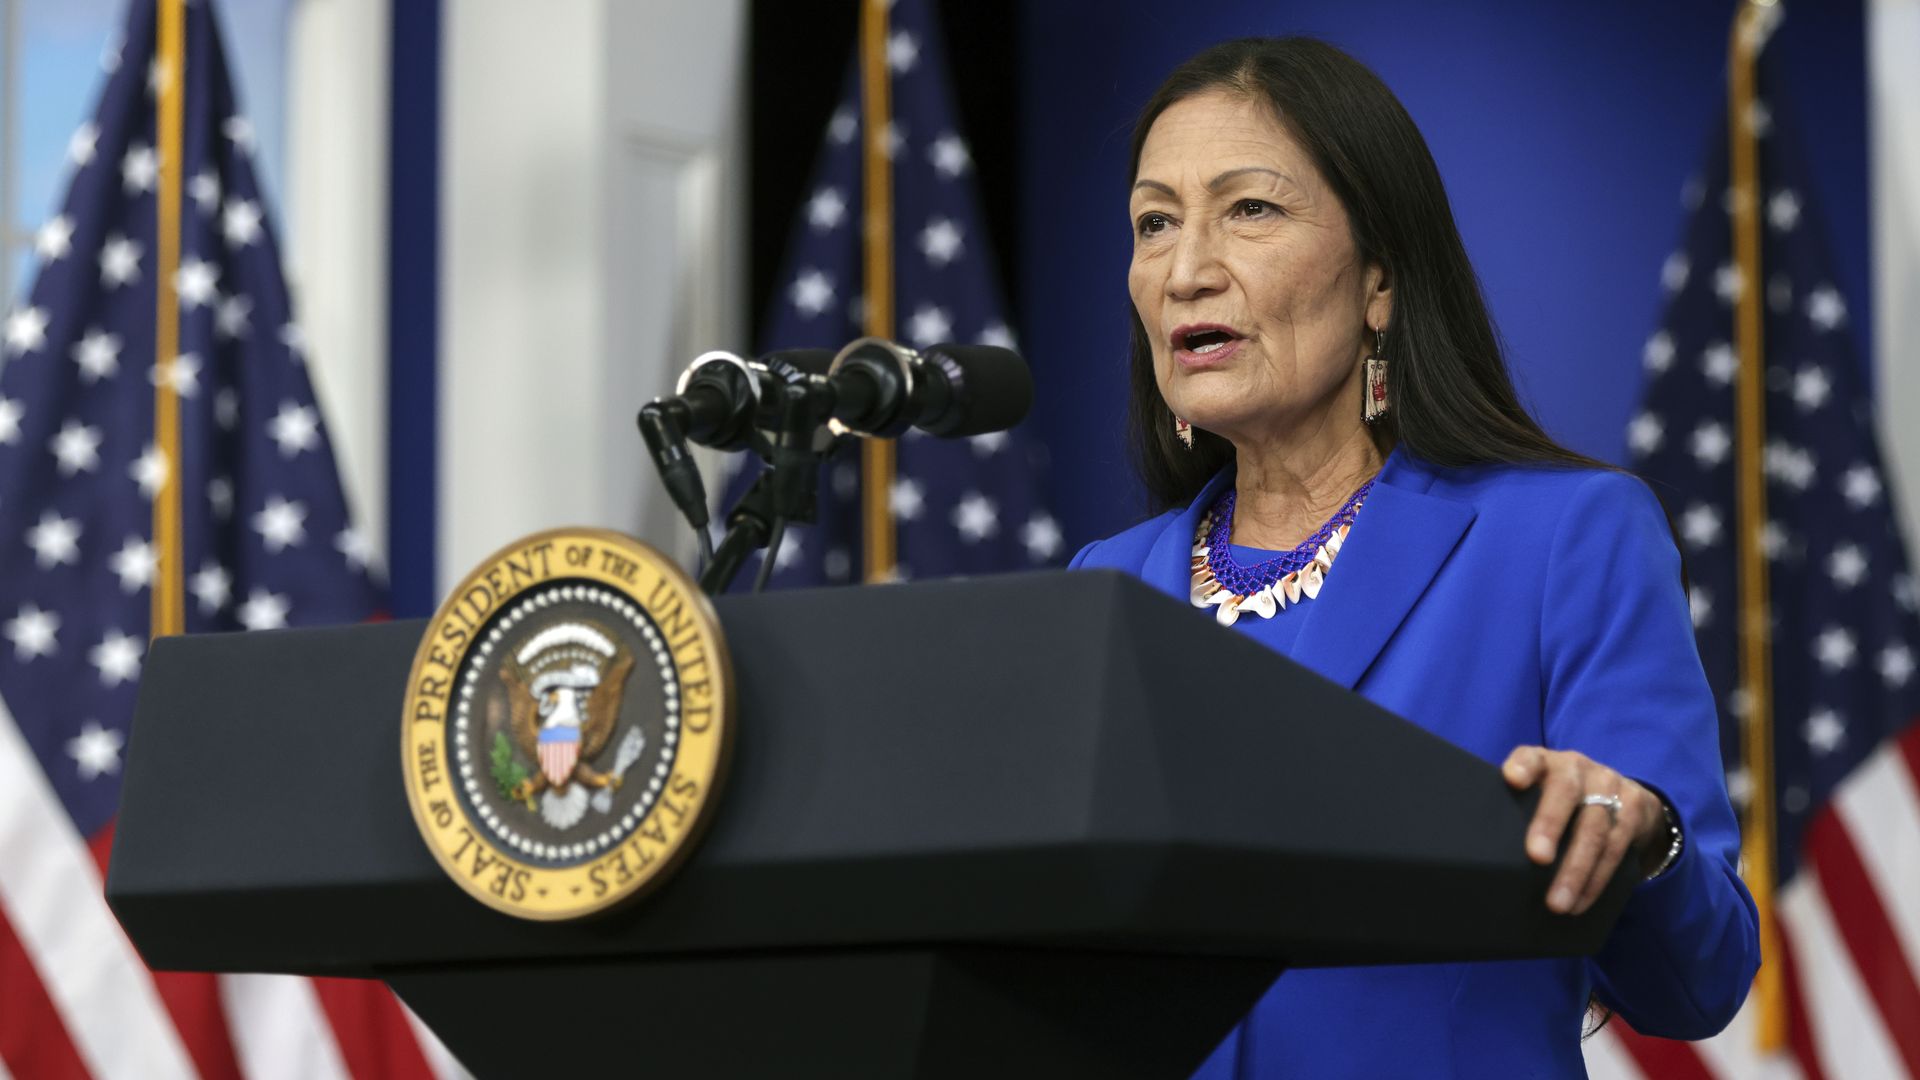 U.S. Interior Secretary Deb Haaland delivers remarks at the 2021 Tribal Nations Summit,mber 15, 2021 in Washington, DC. 